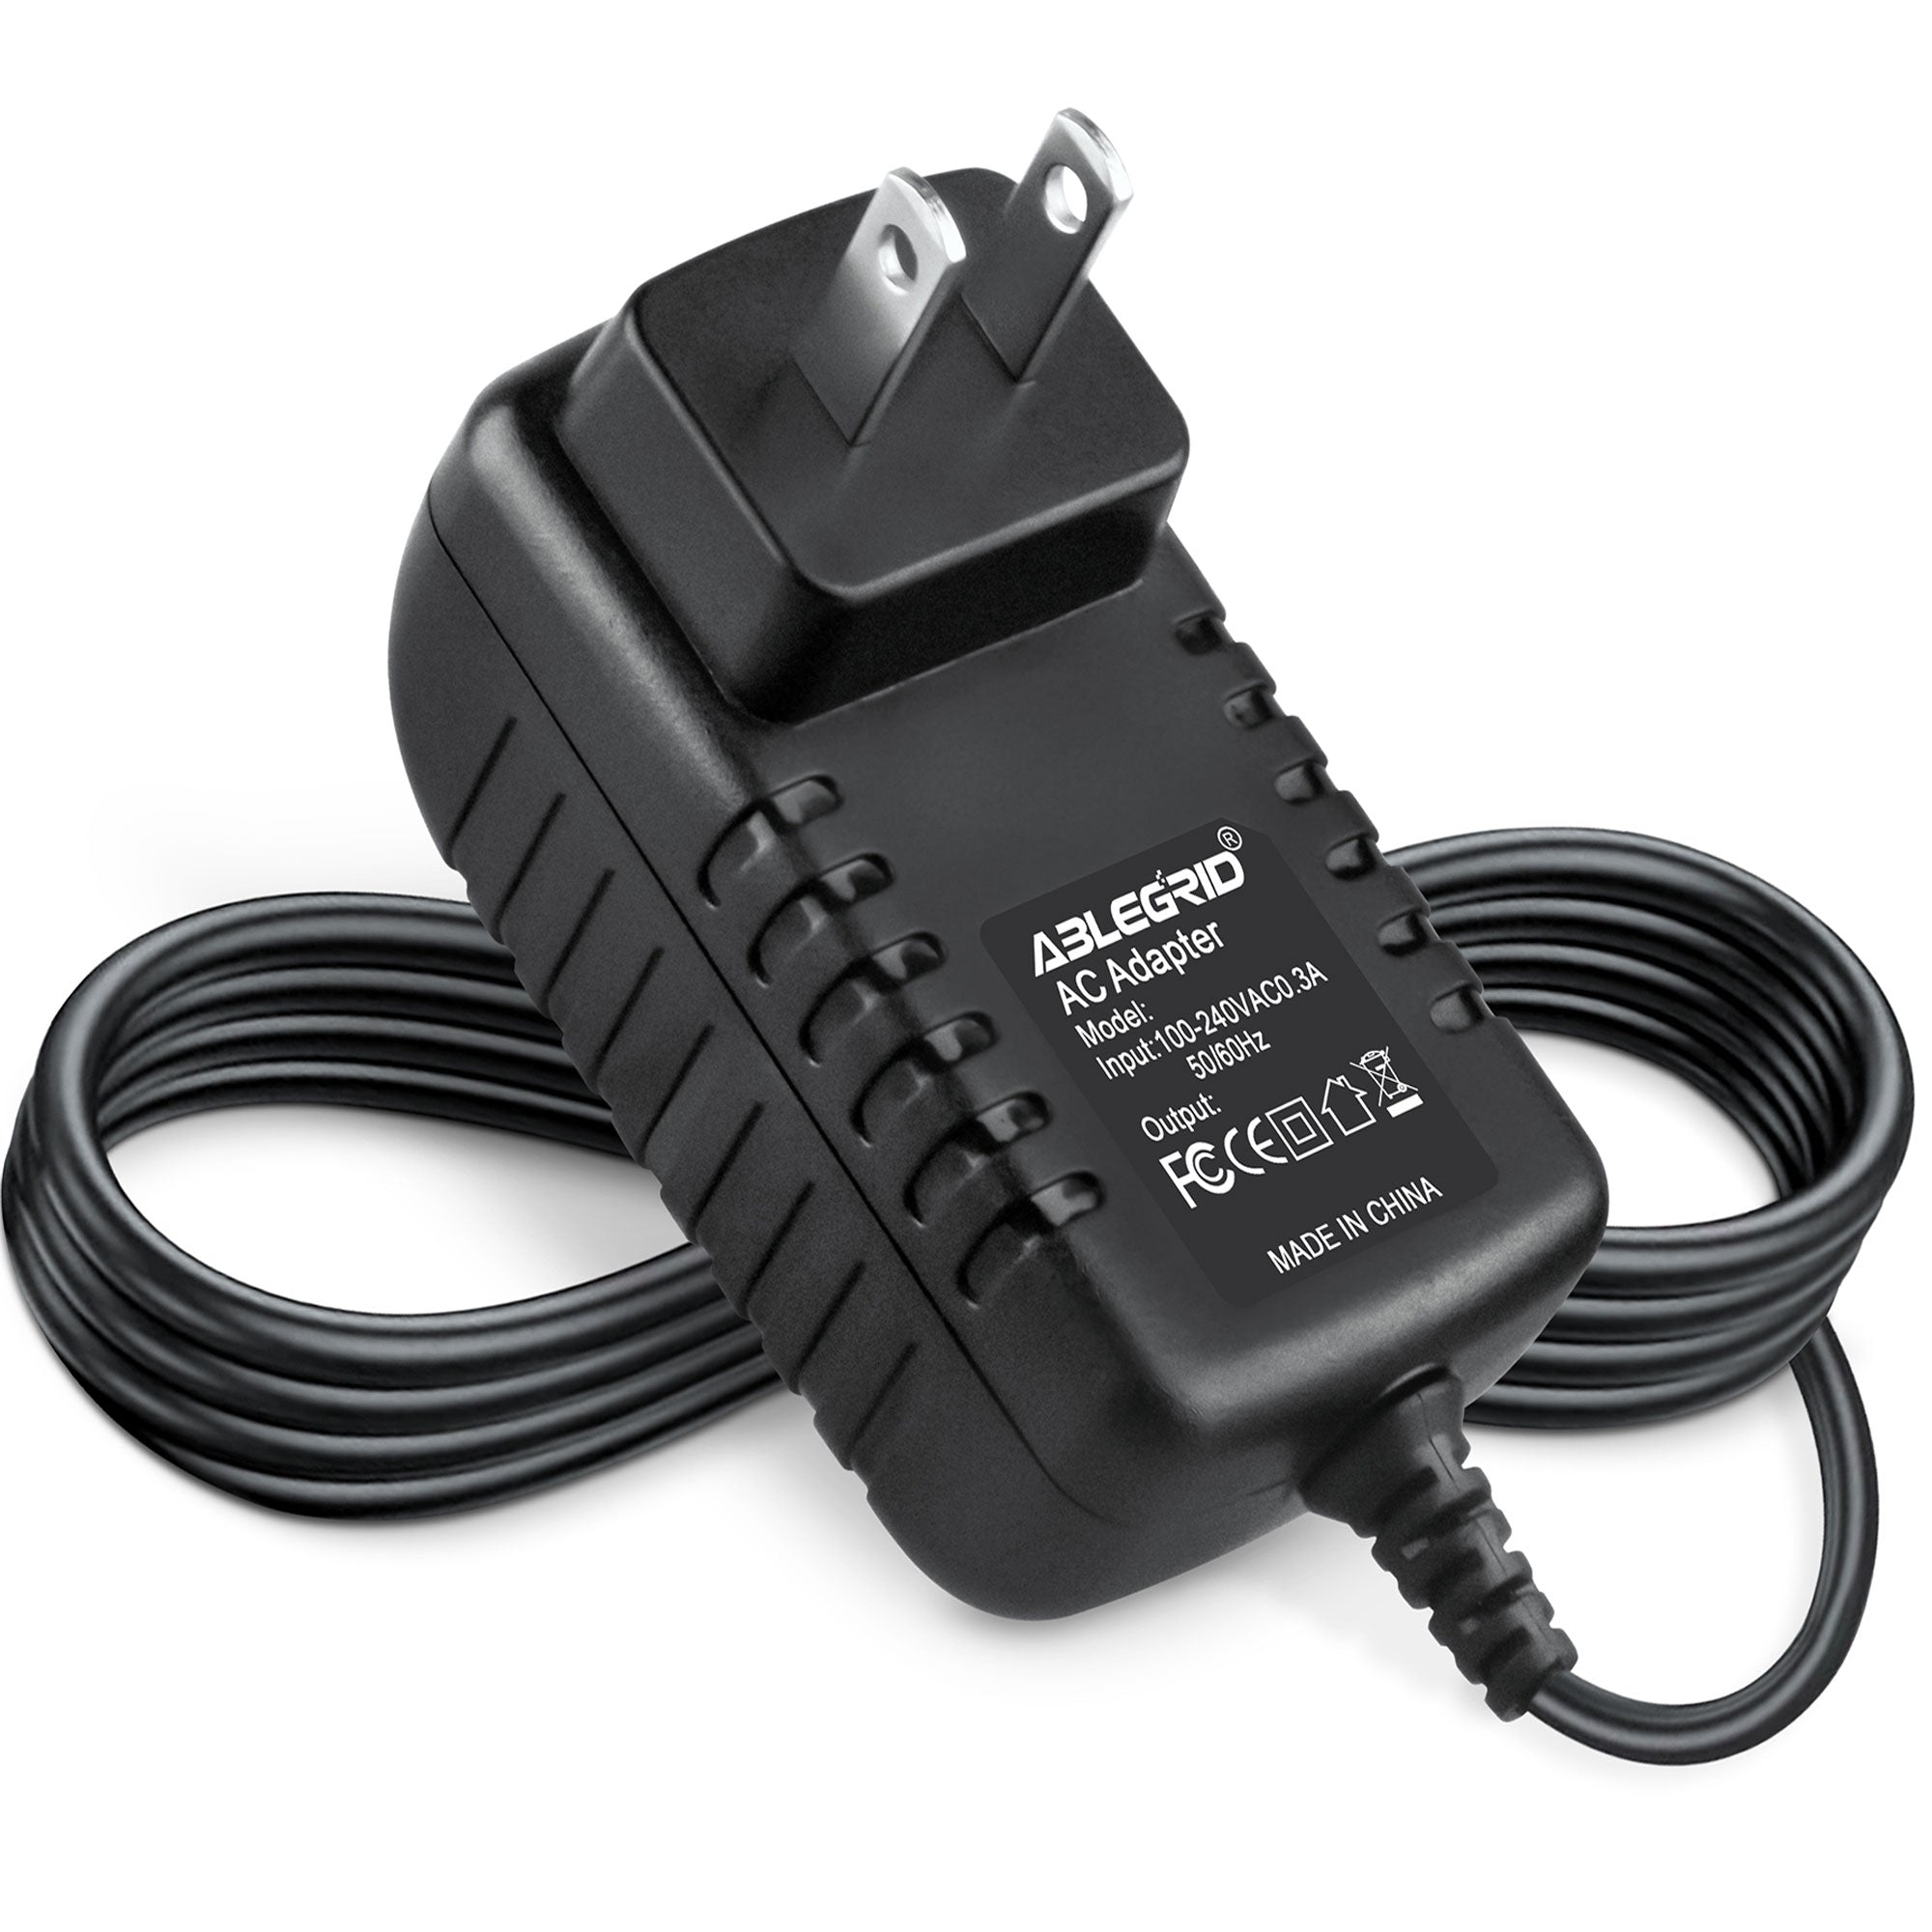 AbleGrid AC-DC Adapter for Euro-Pro 8.4V AD-1215-U Sweeper Shark (Note: There are two versions plug tip type for model AD-1215-U 8. W/Barrel round plug tip. NOT fit Euro-Pro Model V6V617R 8.4V)